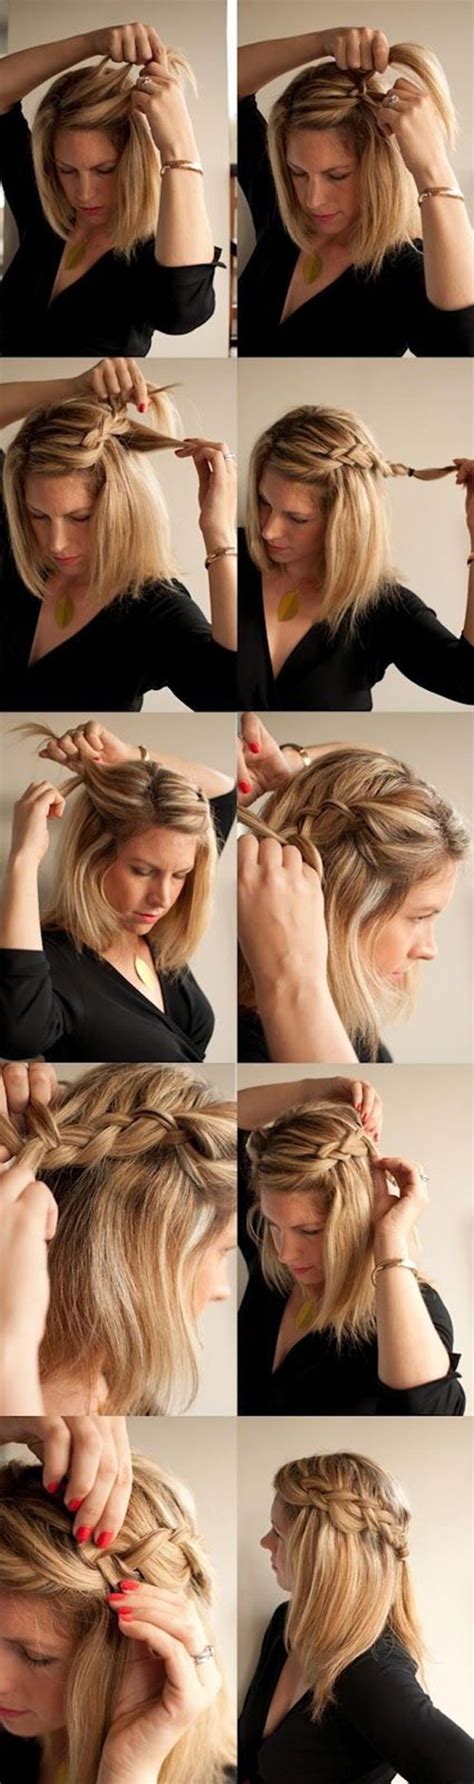 French braid step by step for beginners. 20+ Easy Step By Step Summer Braids Style Tutorials For ...